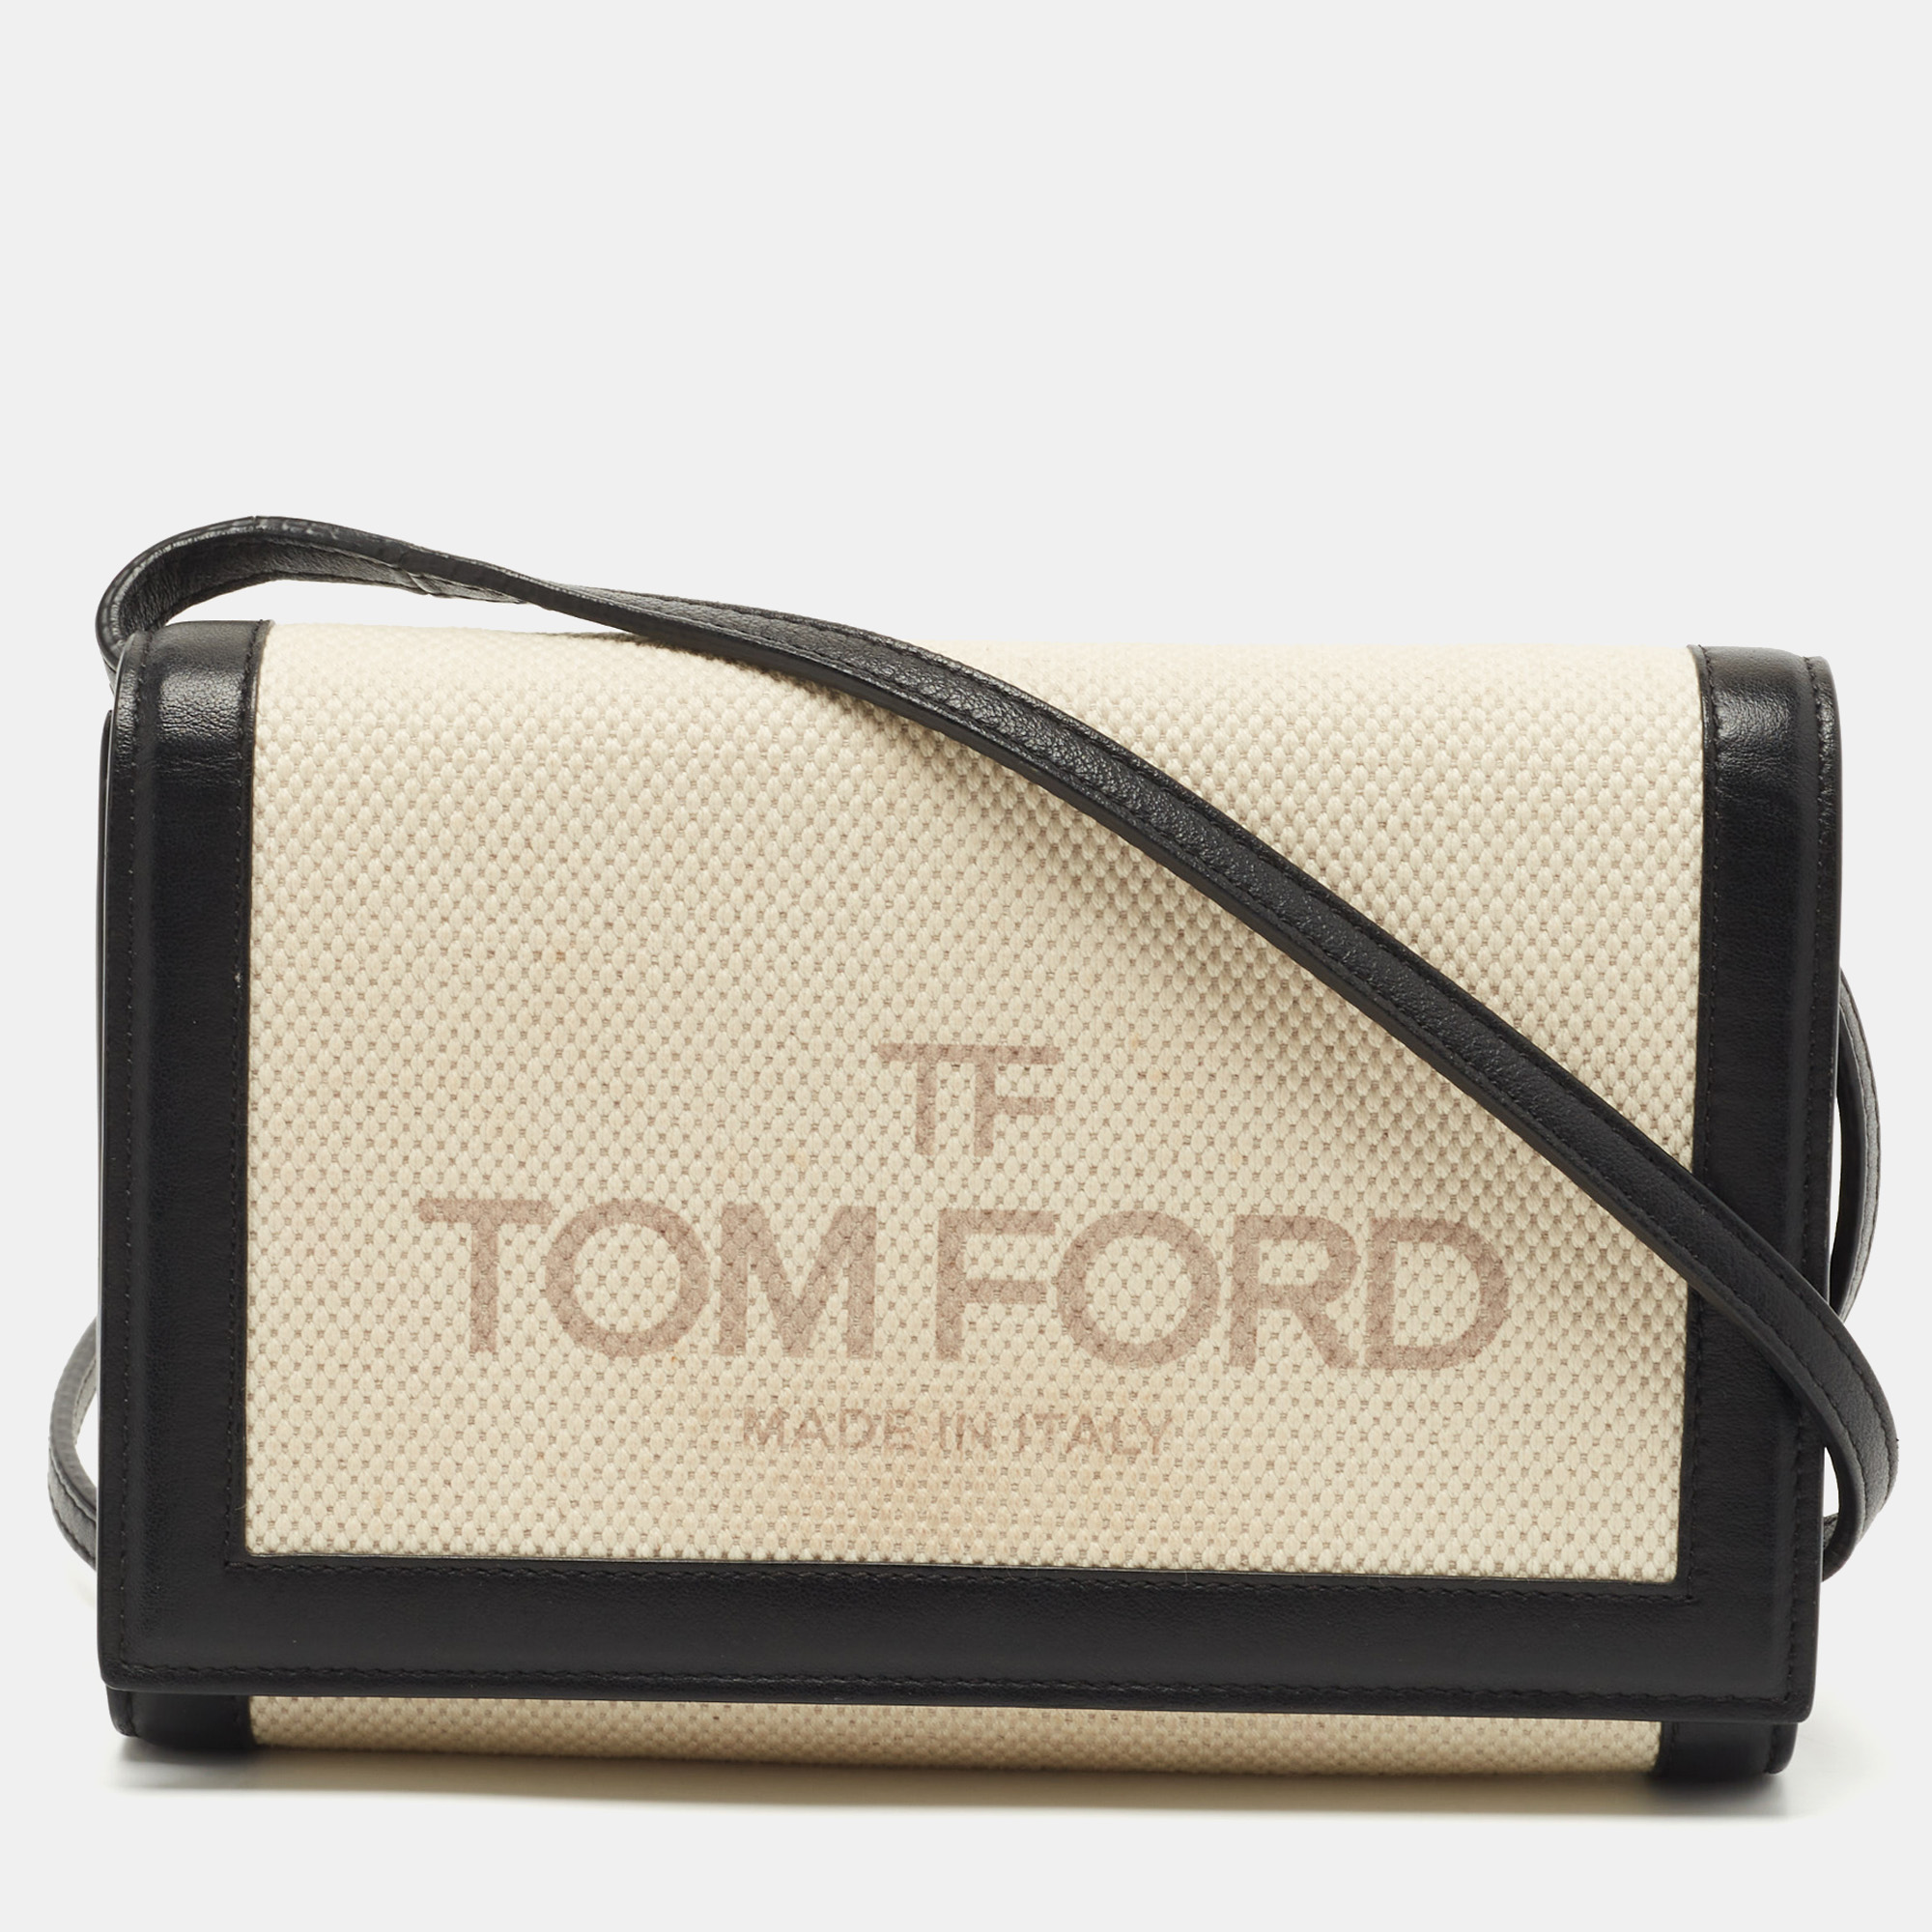 Trust this Tom Ford bag to be light durable and comfortable to carry. It is crafted beautifully using the best materials to be a durable style ally.